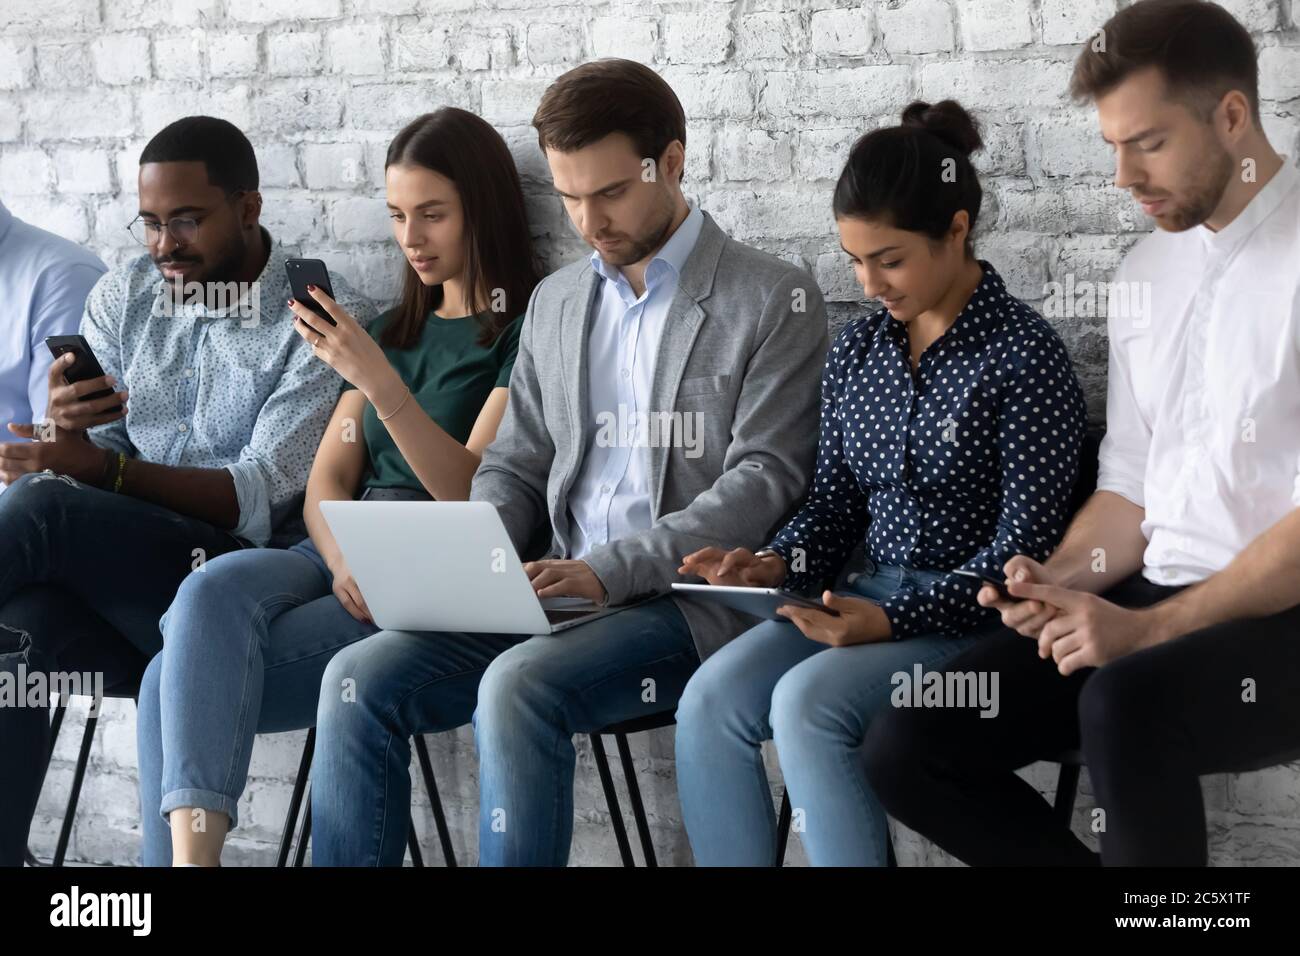 Multiracial applicants focused in gadgets while await for job interview Stock Photo